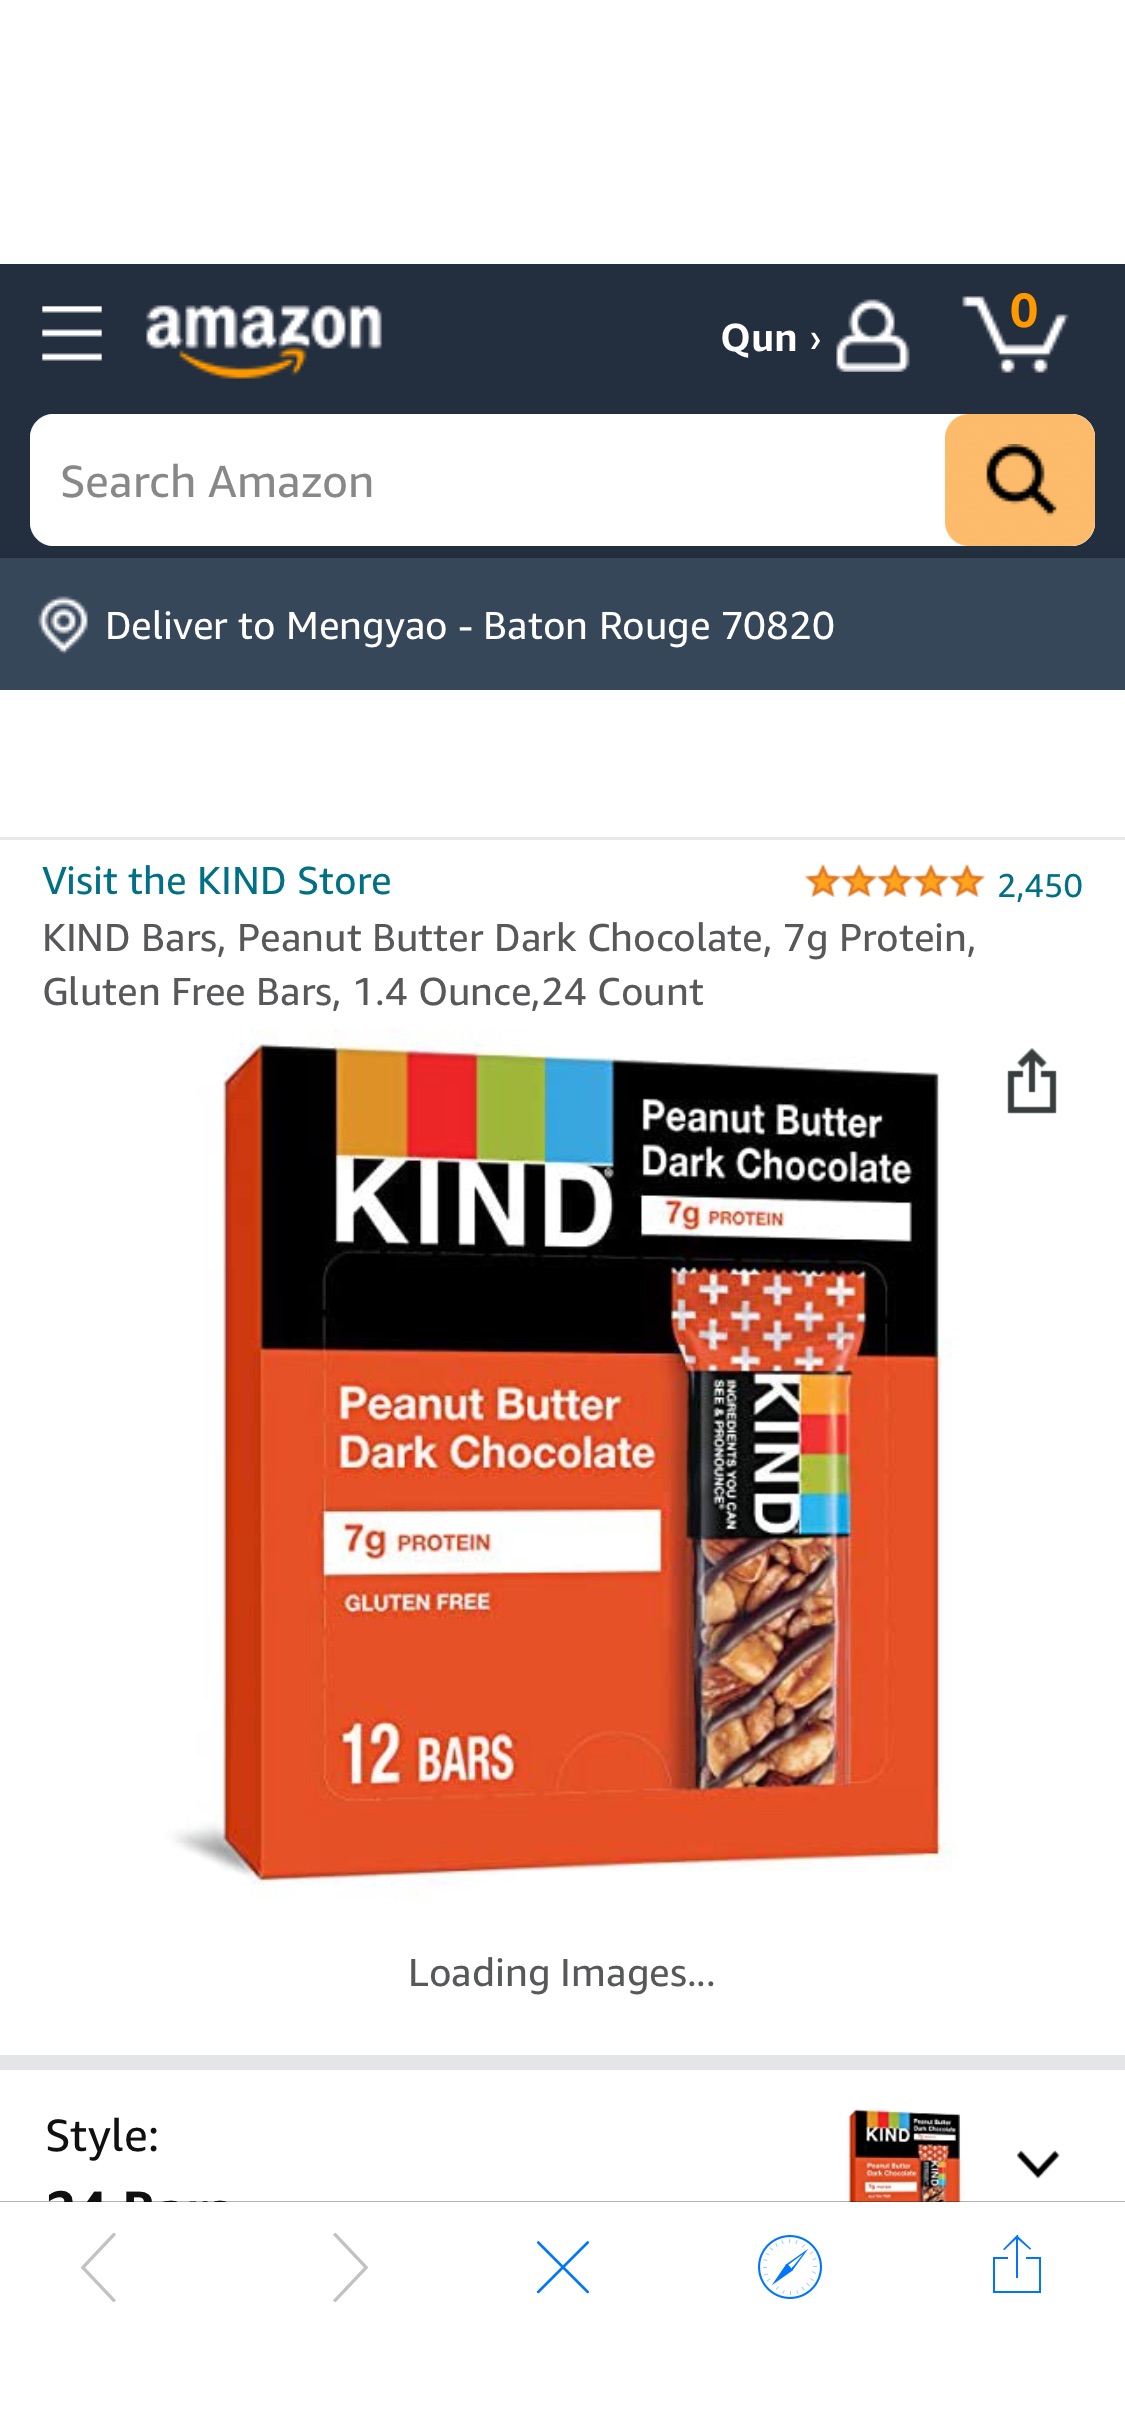 Amazon.com : KIND Bars, Peanut Butter Dark Chocolate, 7g Protein, Gluten Free Bars, 1.4 Ounce,24 Count零食 : Everything Else